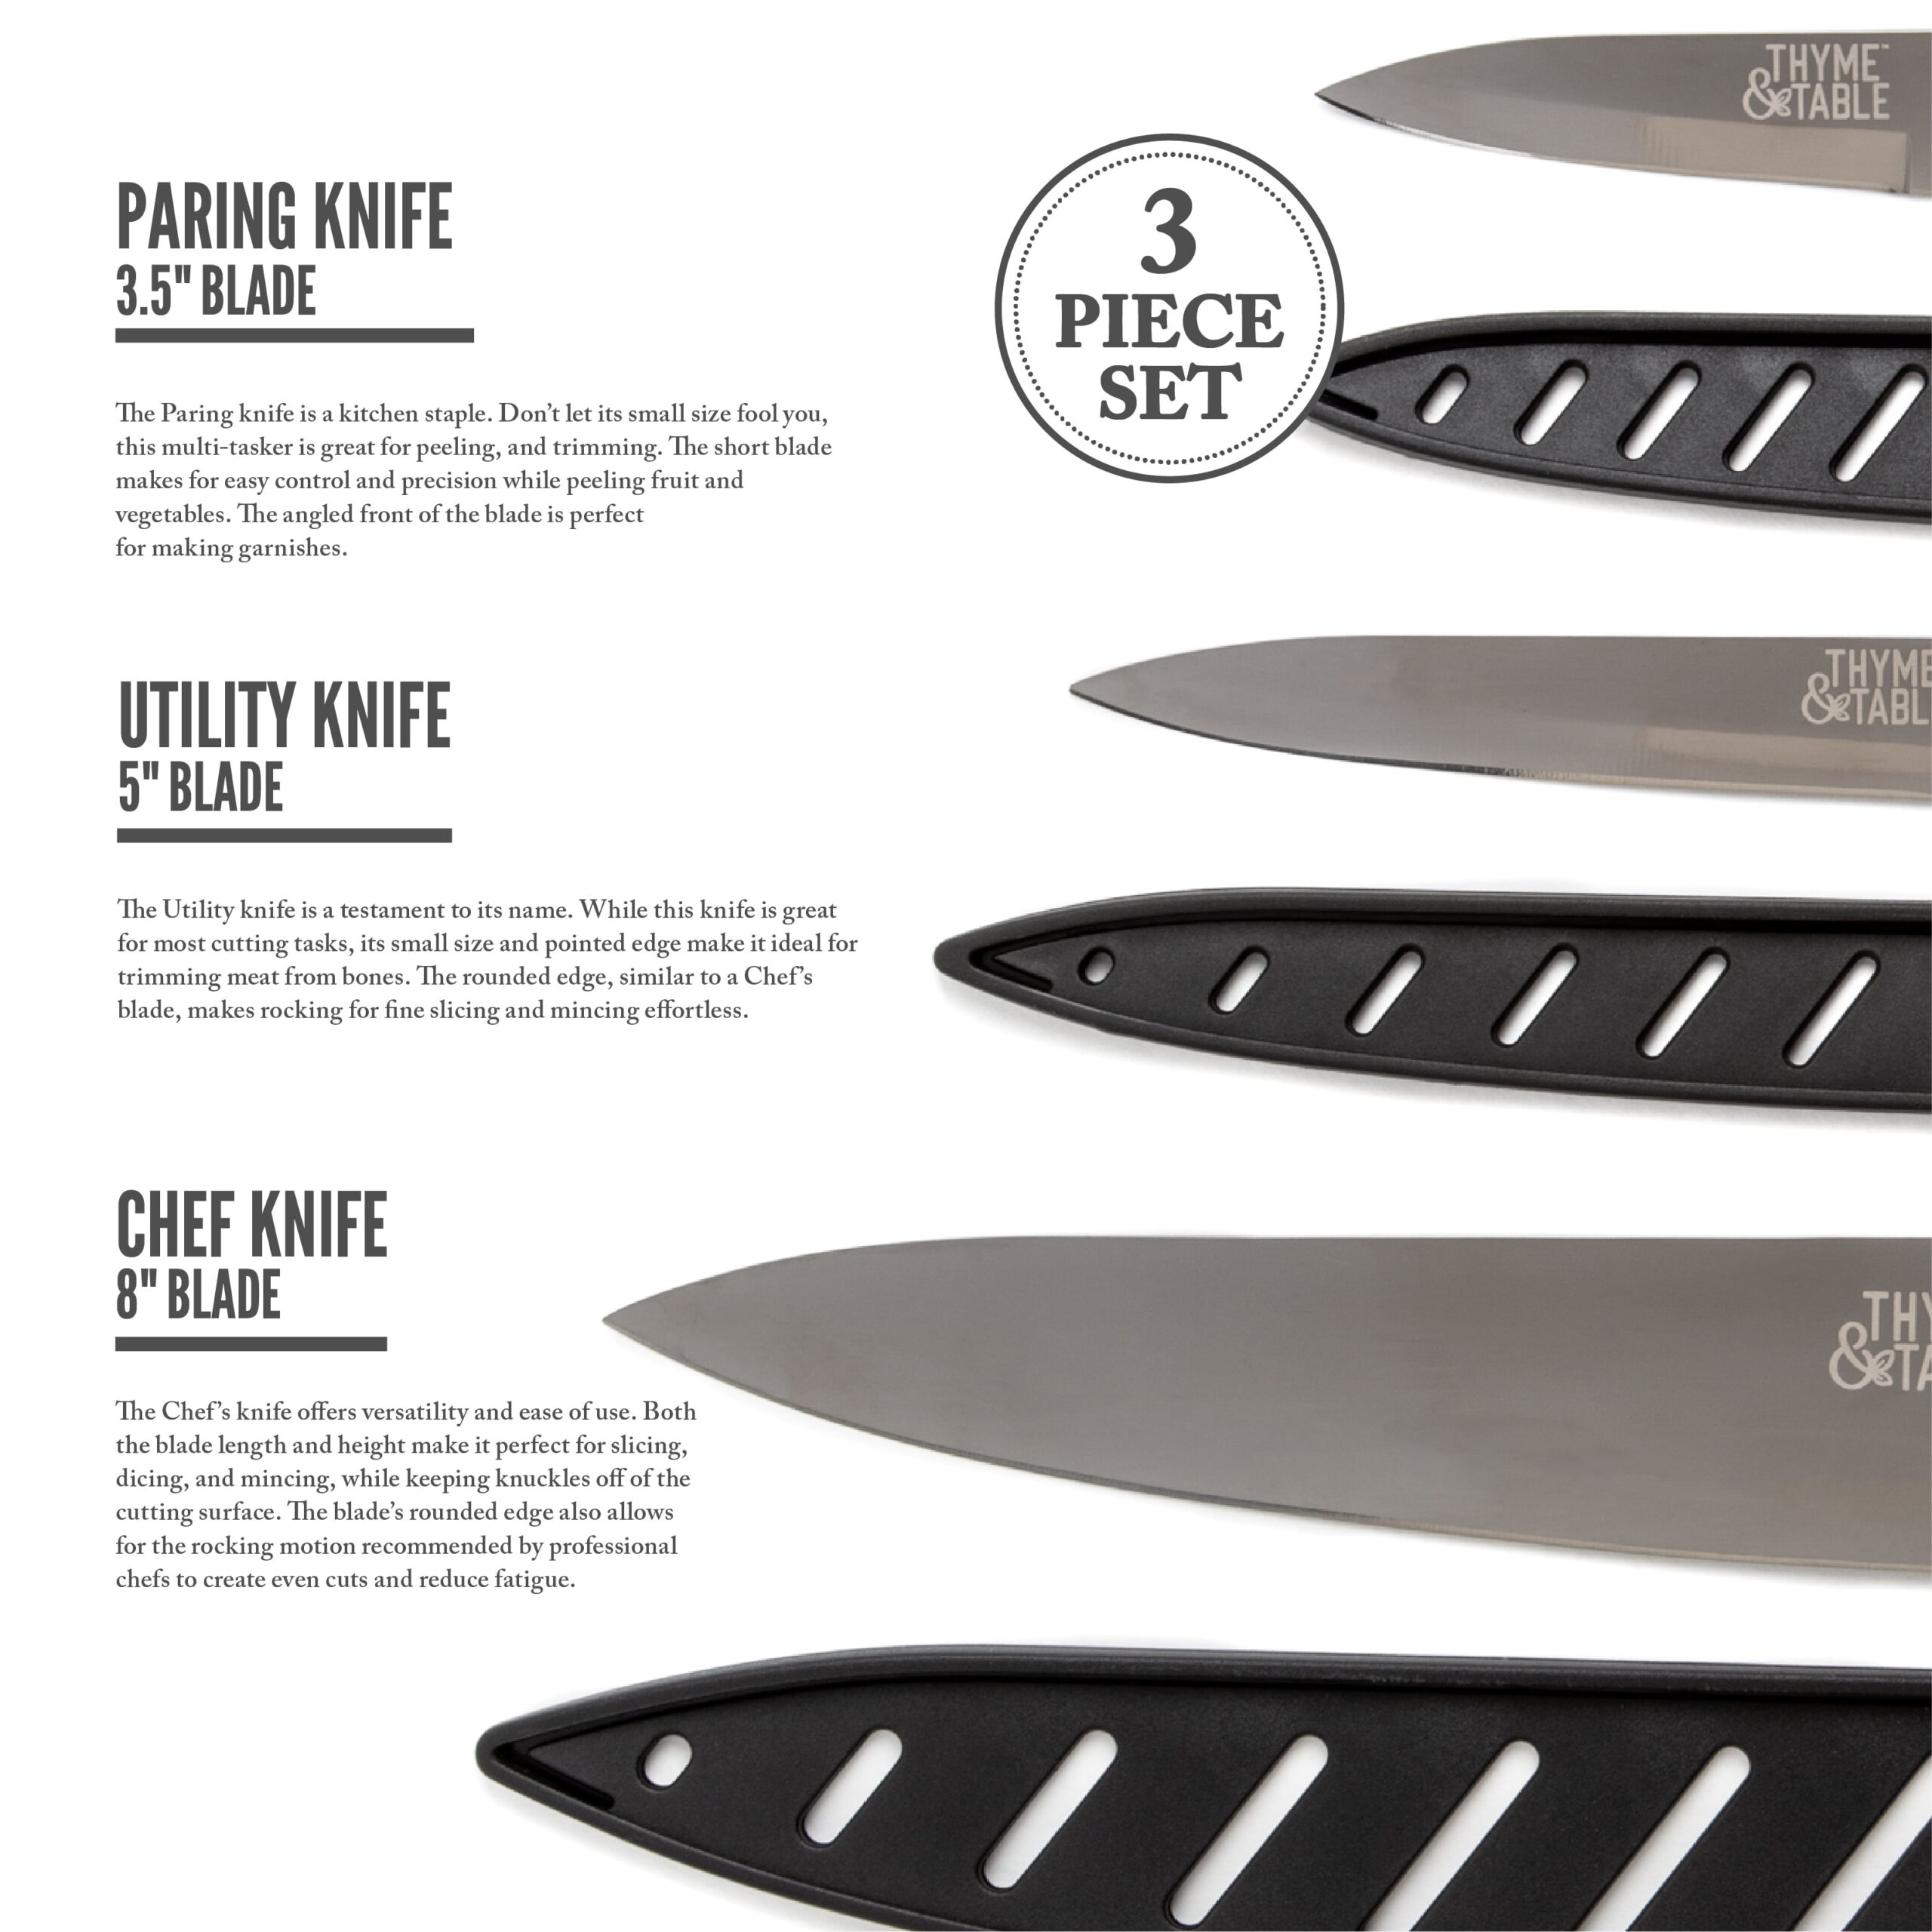 Coated High Carbon Stainless Steel Carbon Chef's Knives, 3 Piece